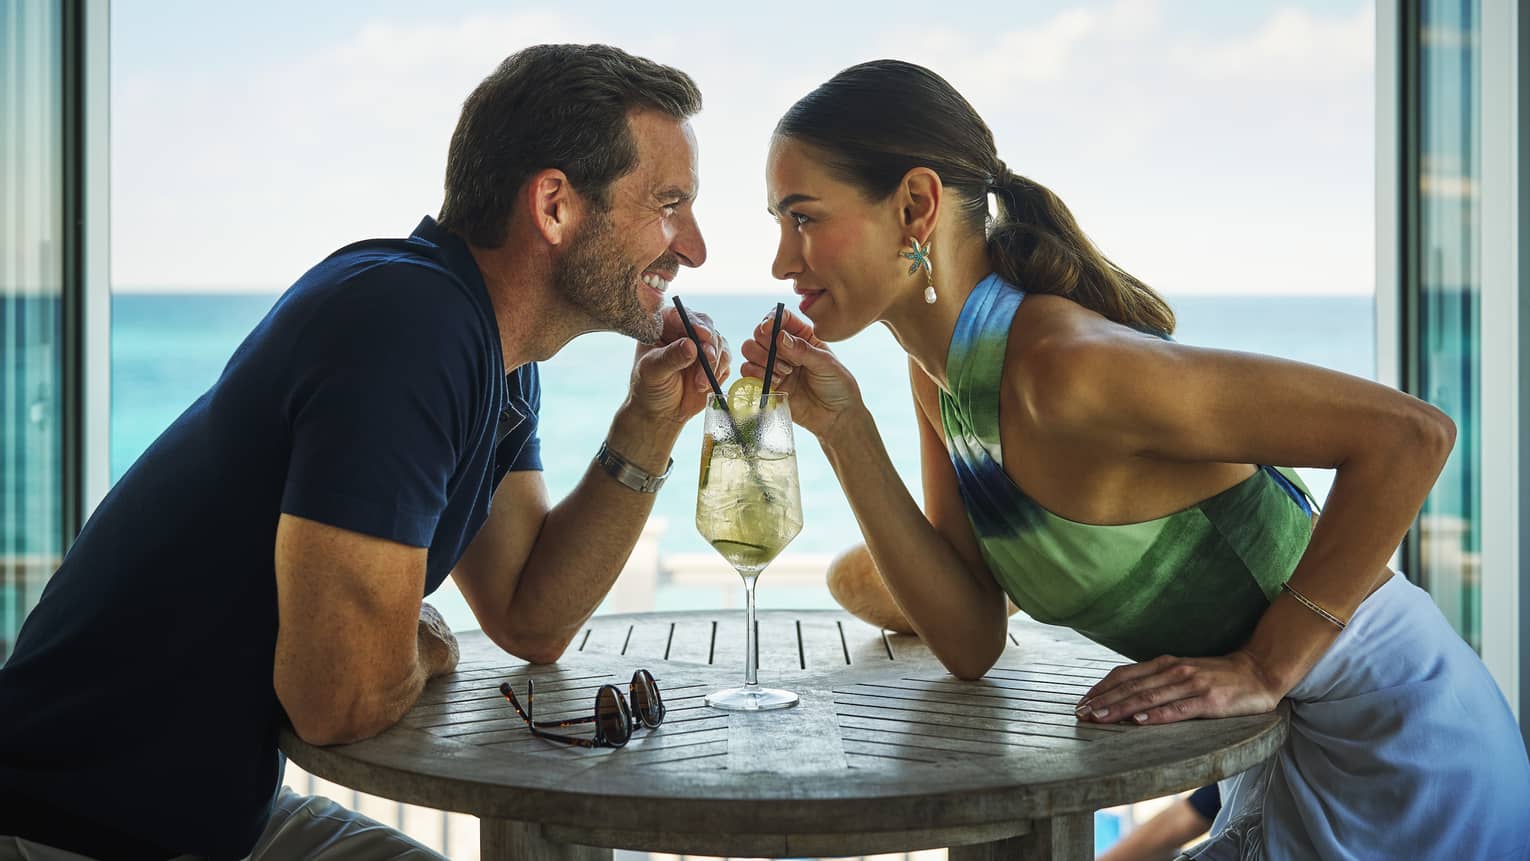 Man and woman sitting at a dinner table with a view of the ocean, sharing a drink.